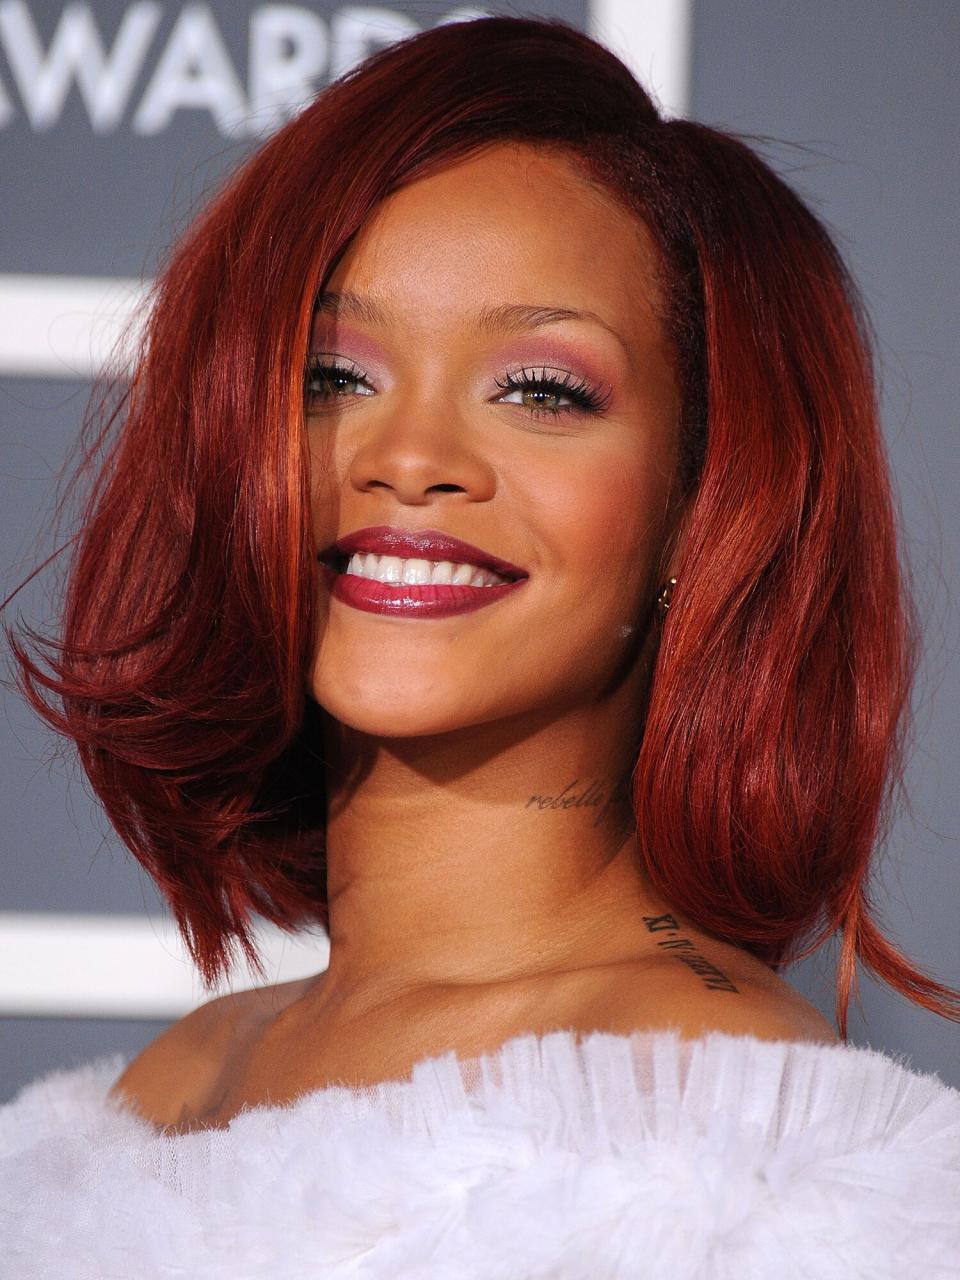 Rihanna arrives at The 53rd Annual GRAMMY Awards at Staples Center on February 13, 2011 in Los Angeles, California